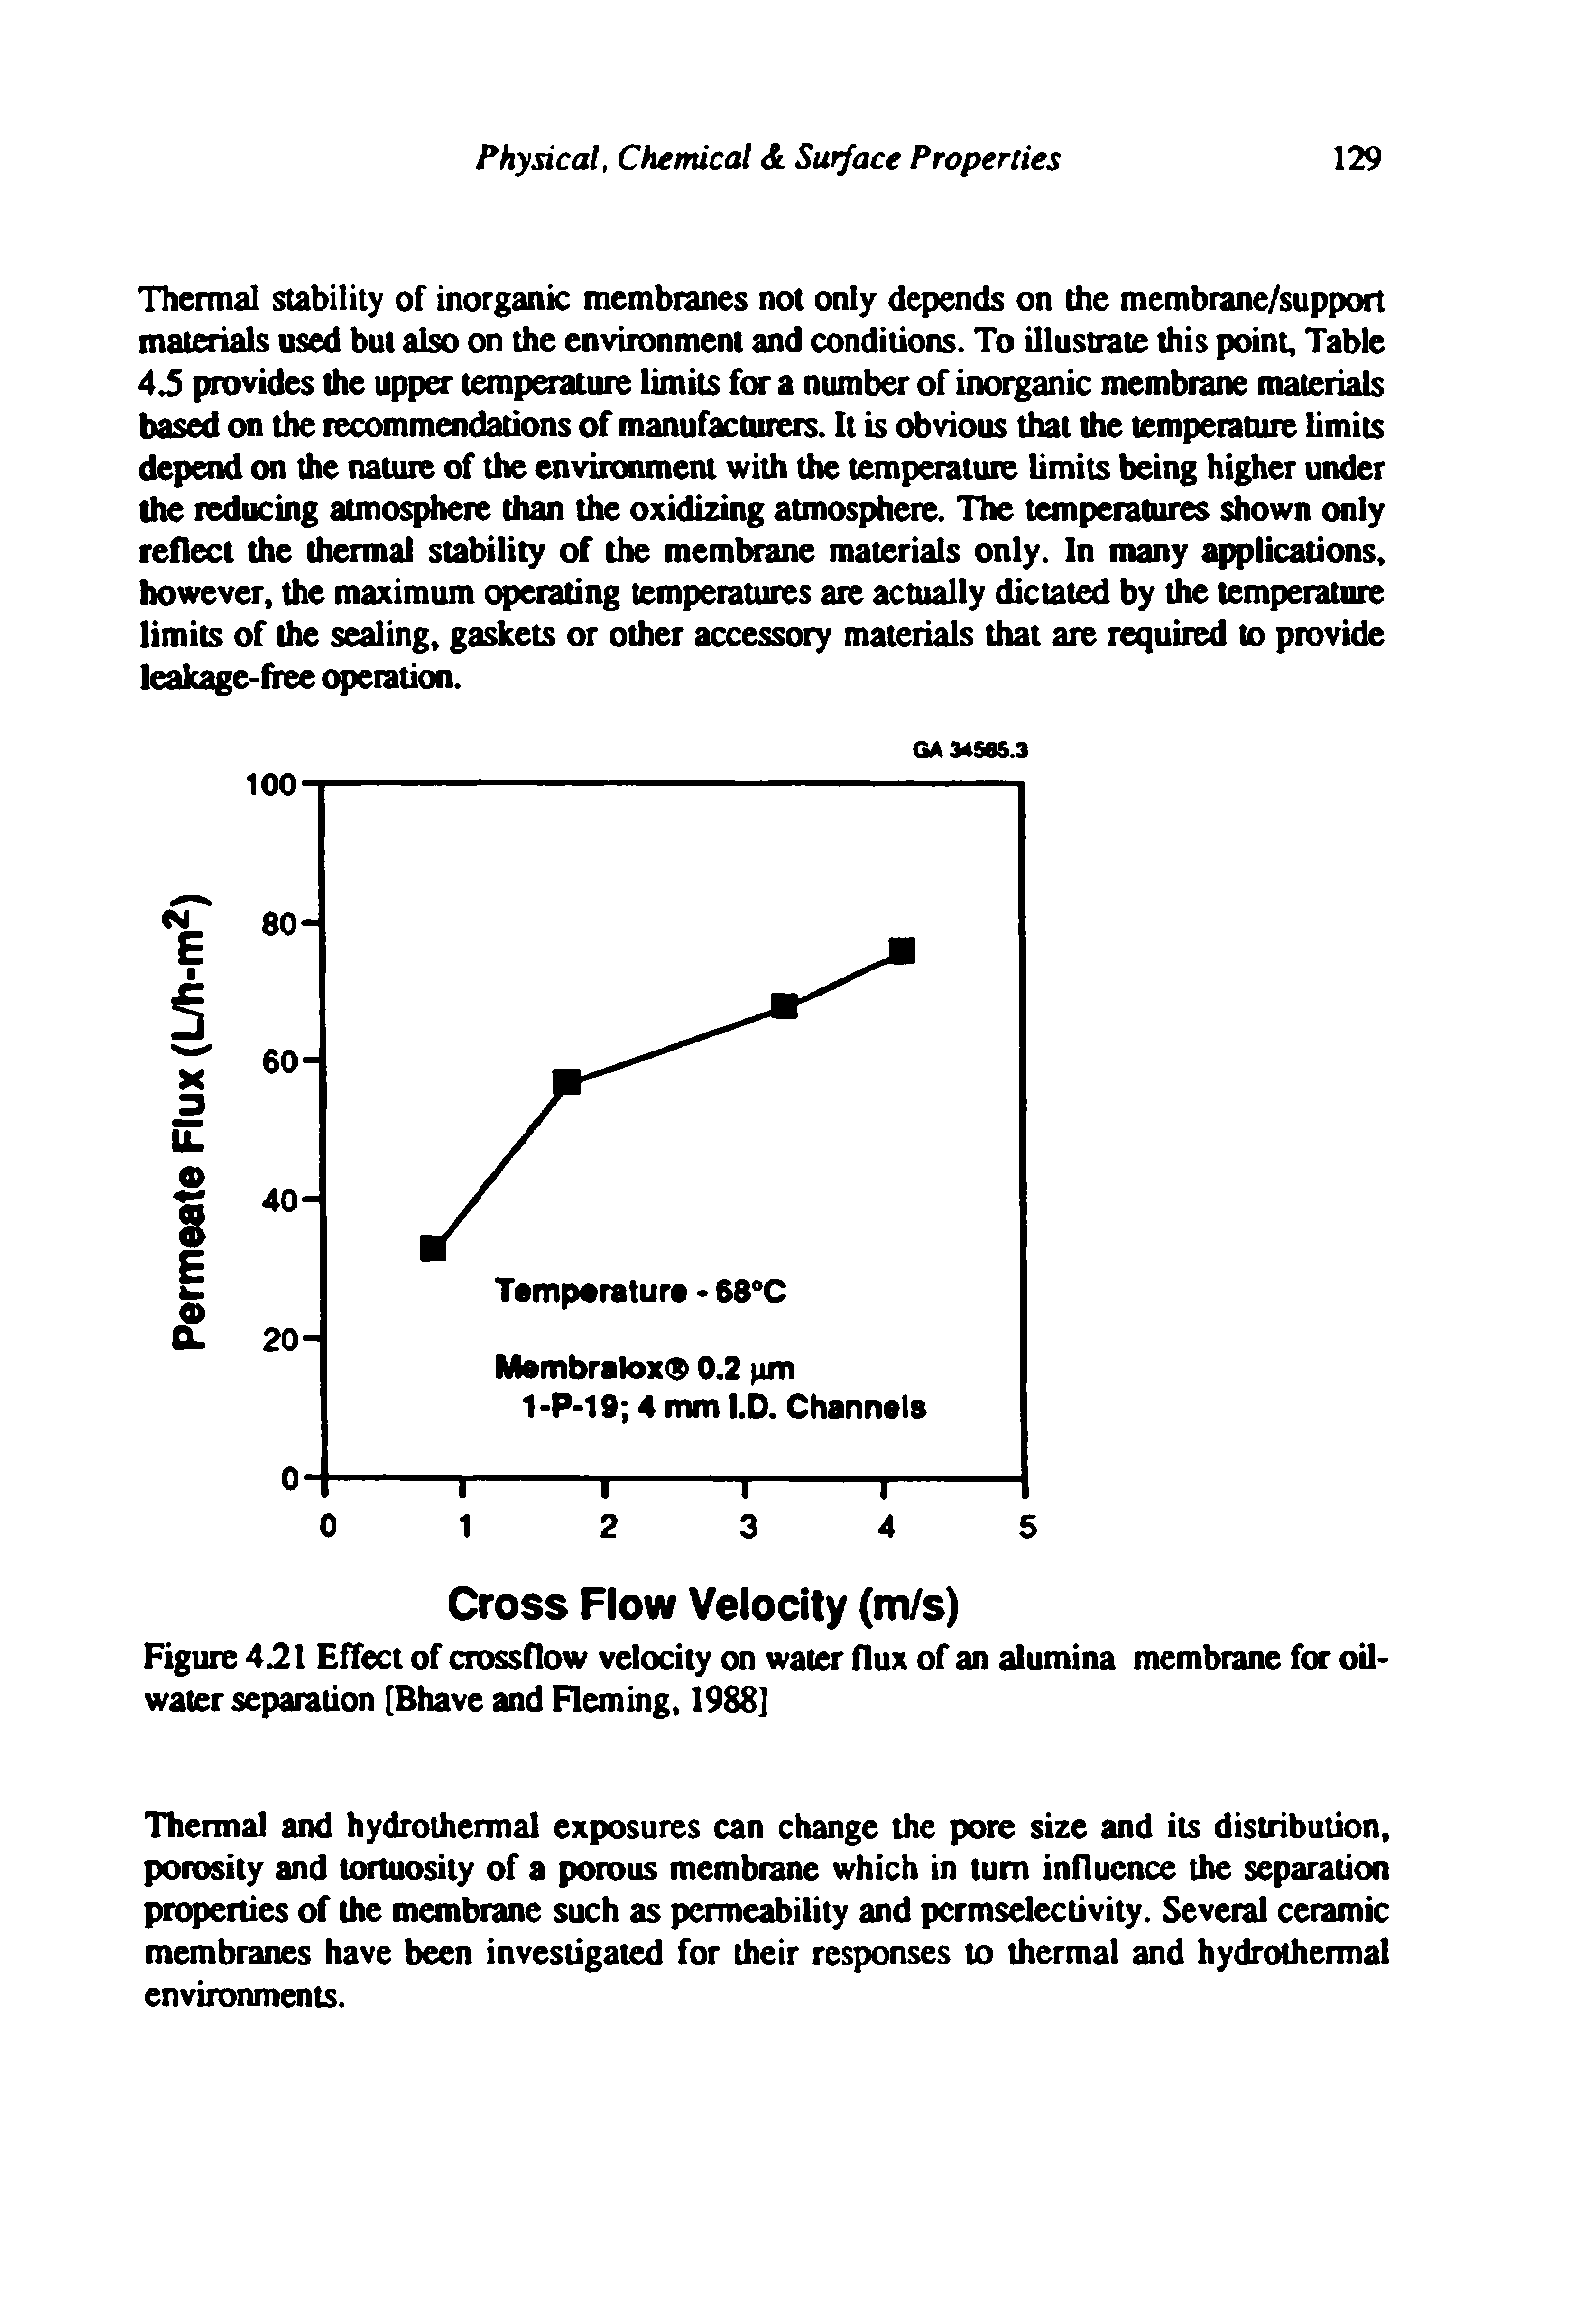 Figure 4.21 Effect of crossflow velocity on water flux of an alumina membrane for oil-water separation [Bhave and Fleming, 1988]...